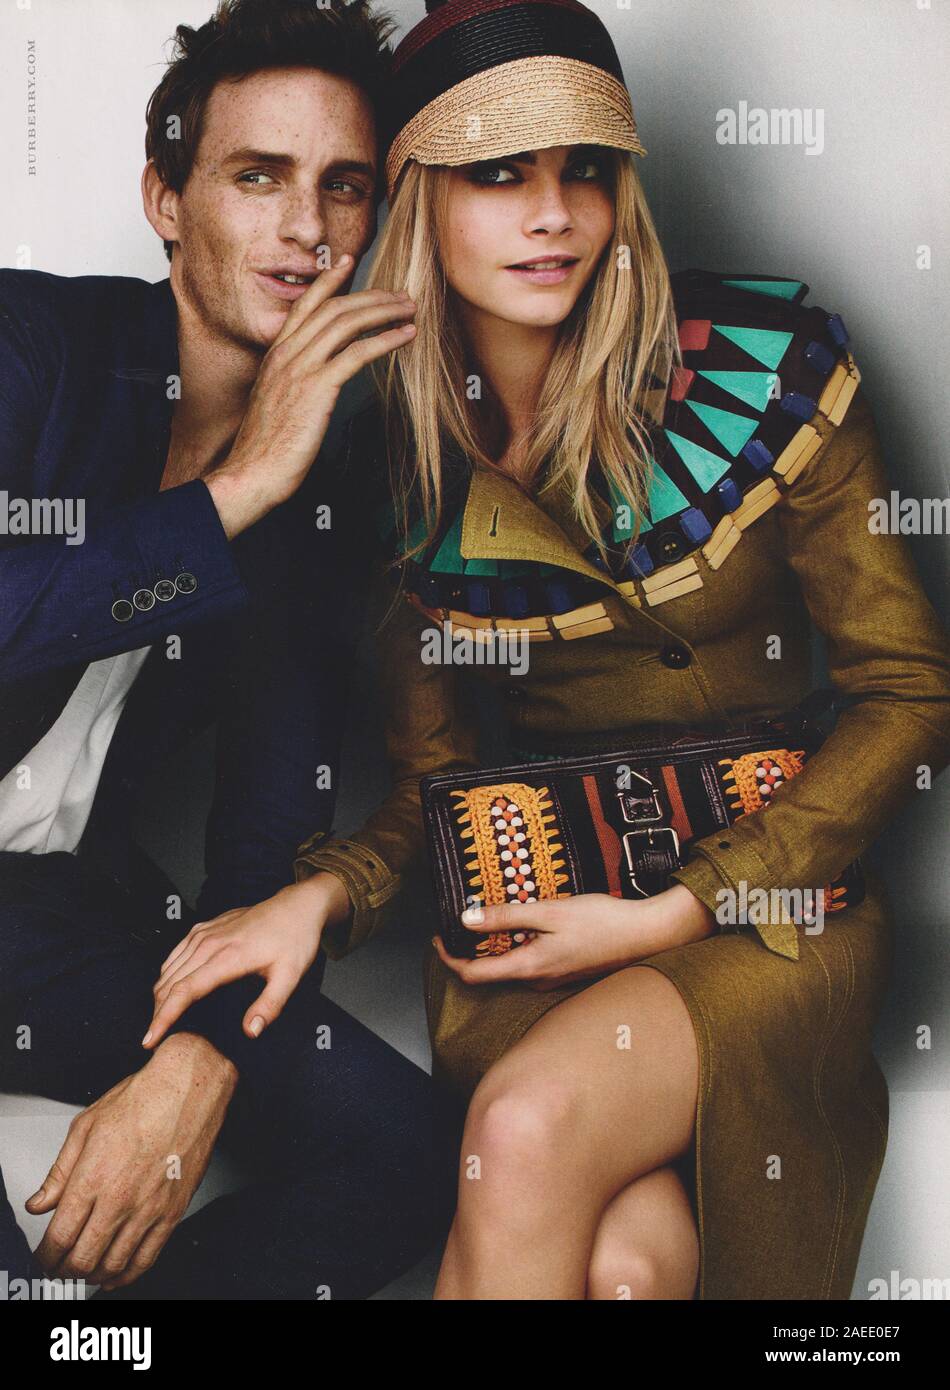 poster advertising Burberry fashion house with Cara Delevingne, Eddie  Redmayne in magazine from 2012, advertisement, creative Burberry 2010s  advert Stock Photo - Alamy